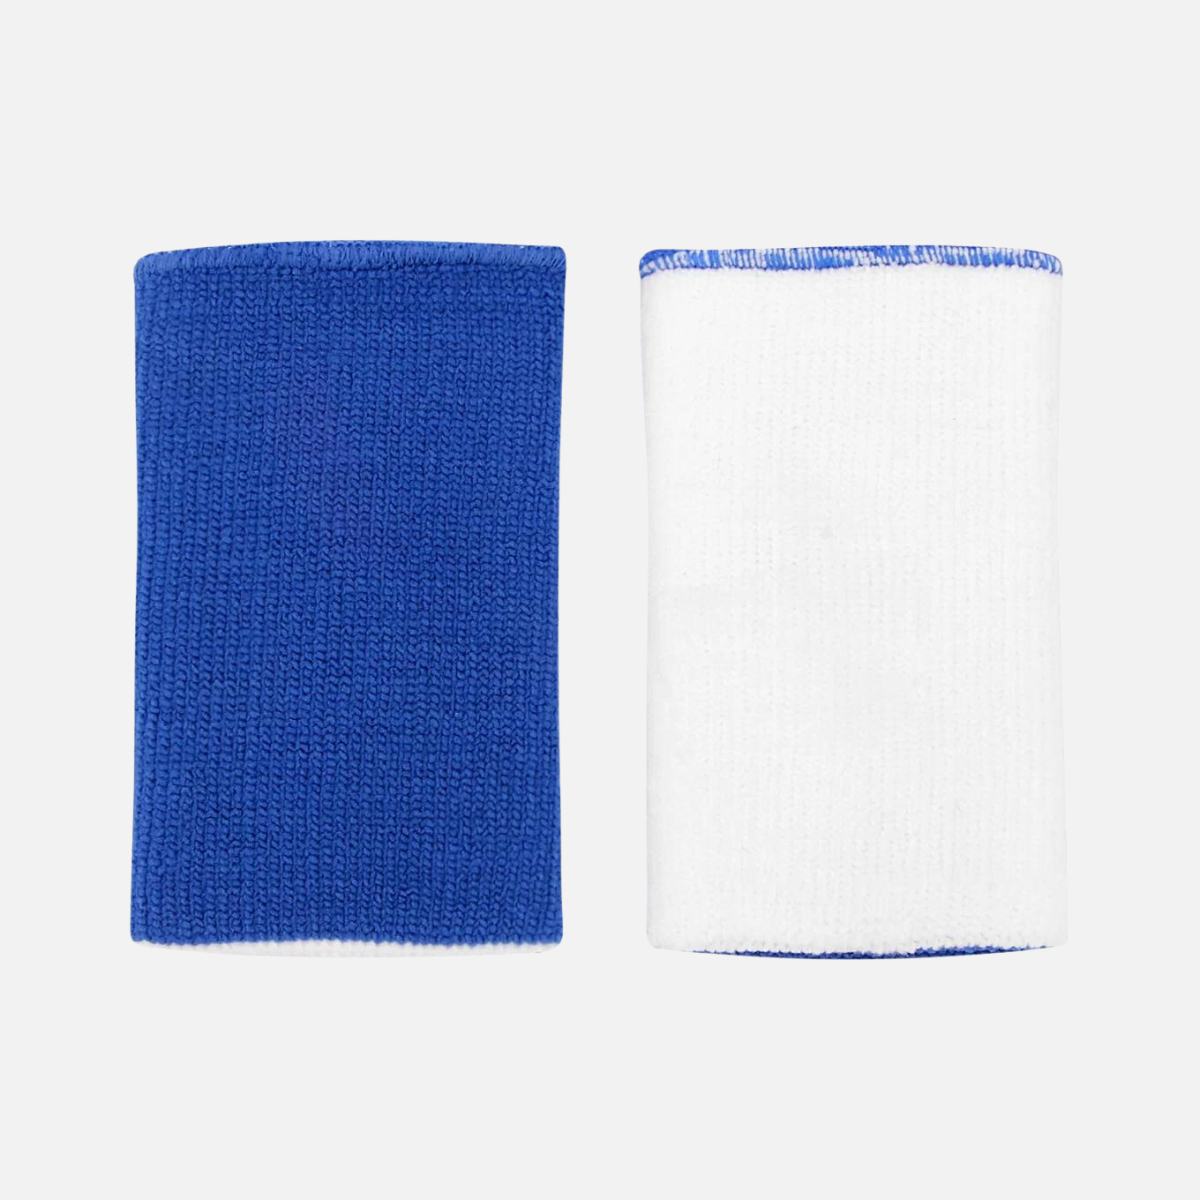 Nike Dri-fit Home & Away Doublewide Double Face Wrist band -White/Royal Blue